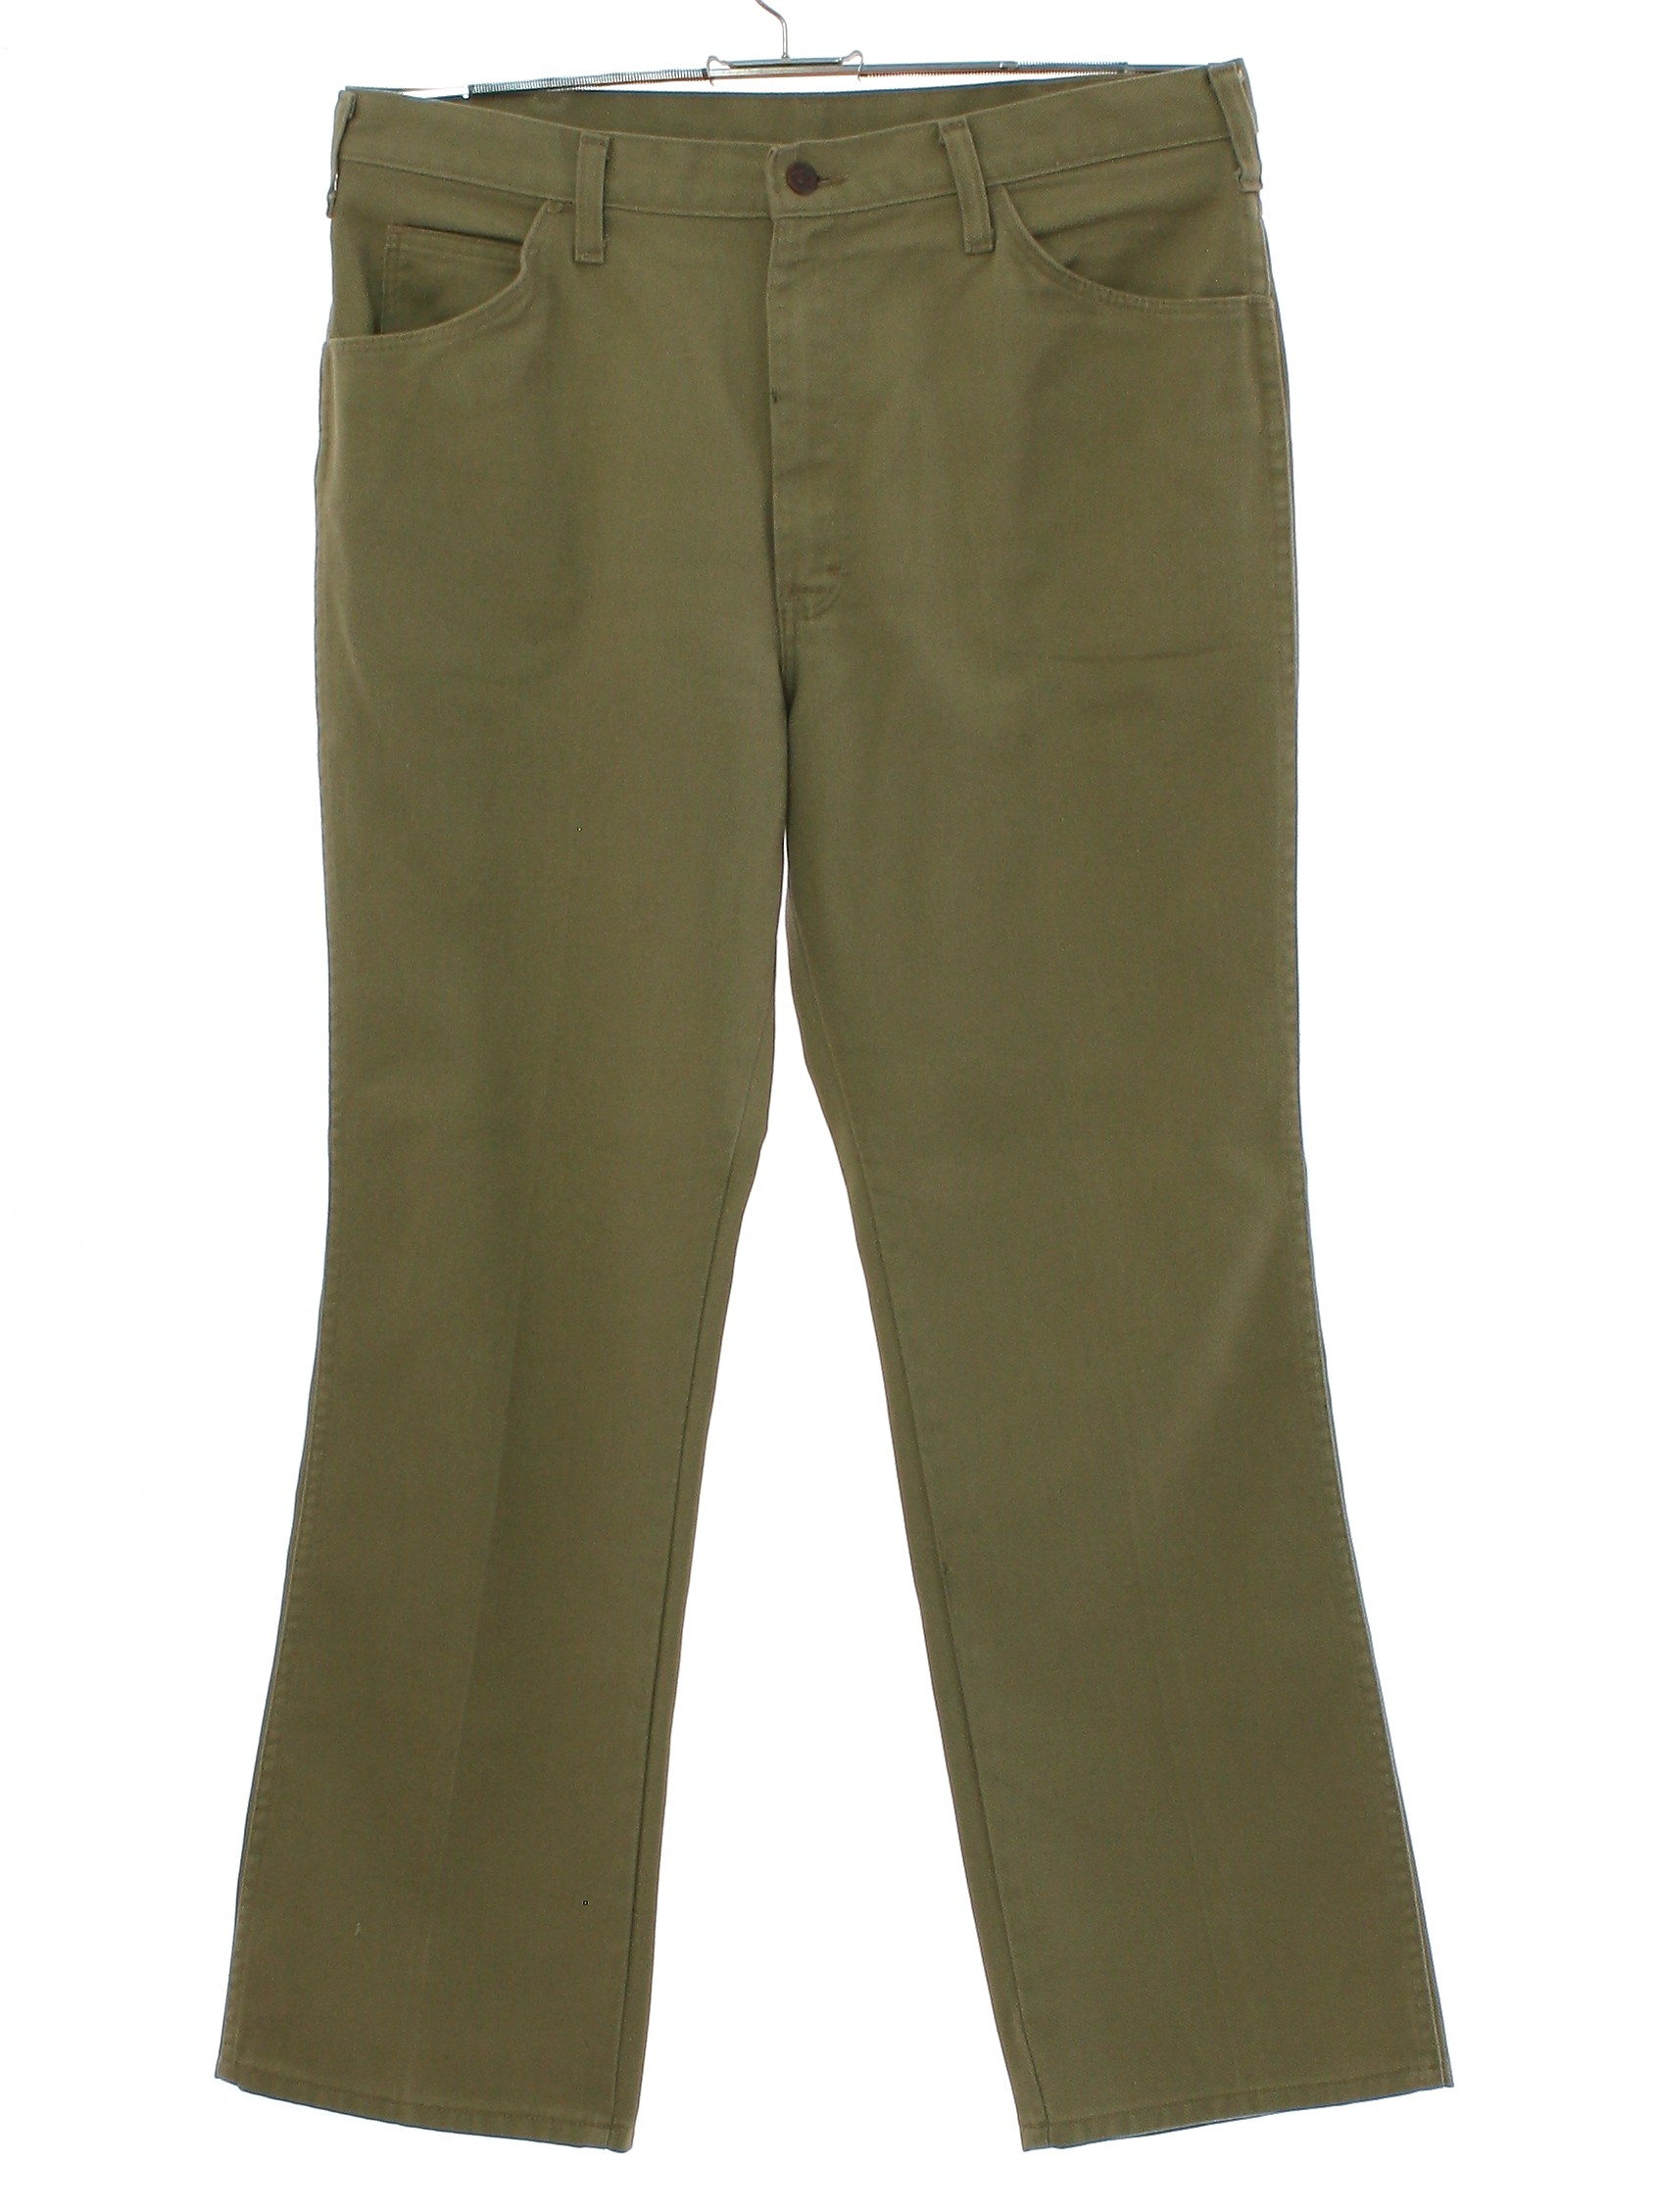 Retro 1970s Pants: 70s -Dickies- Mens tan solid colored cotton ...